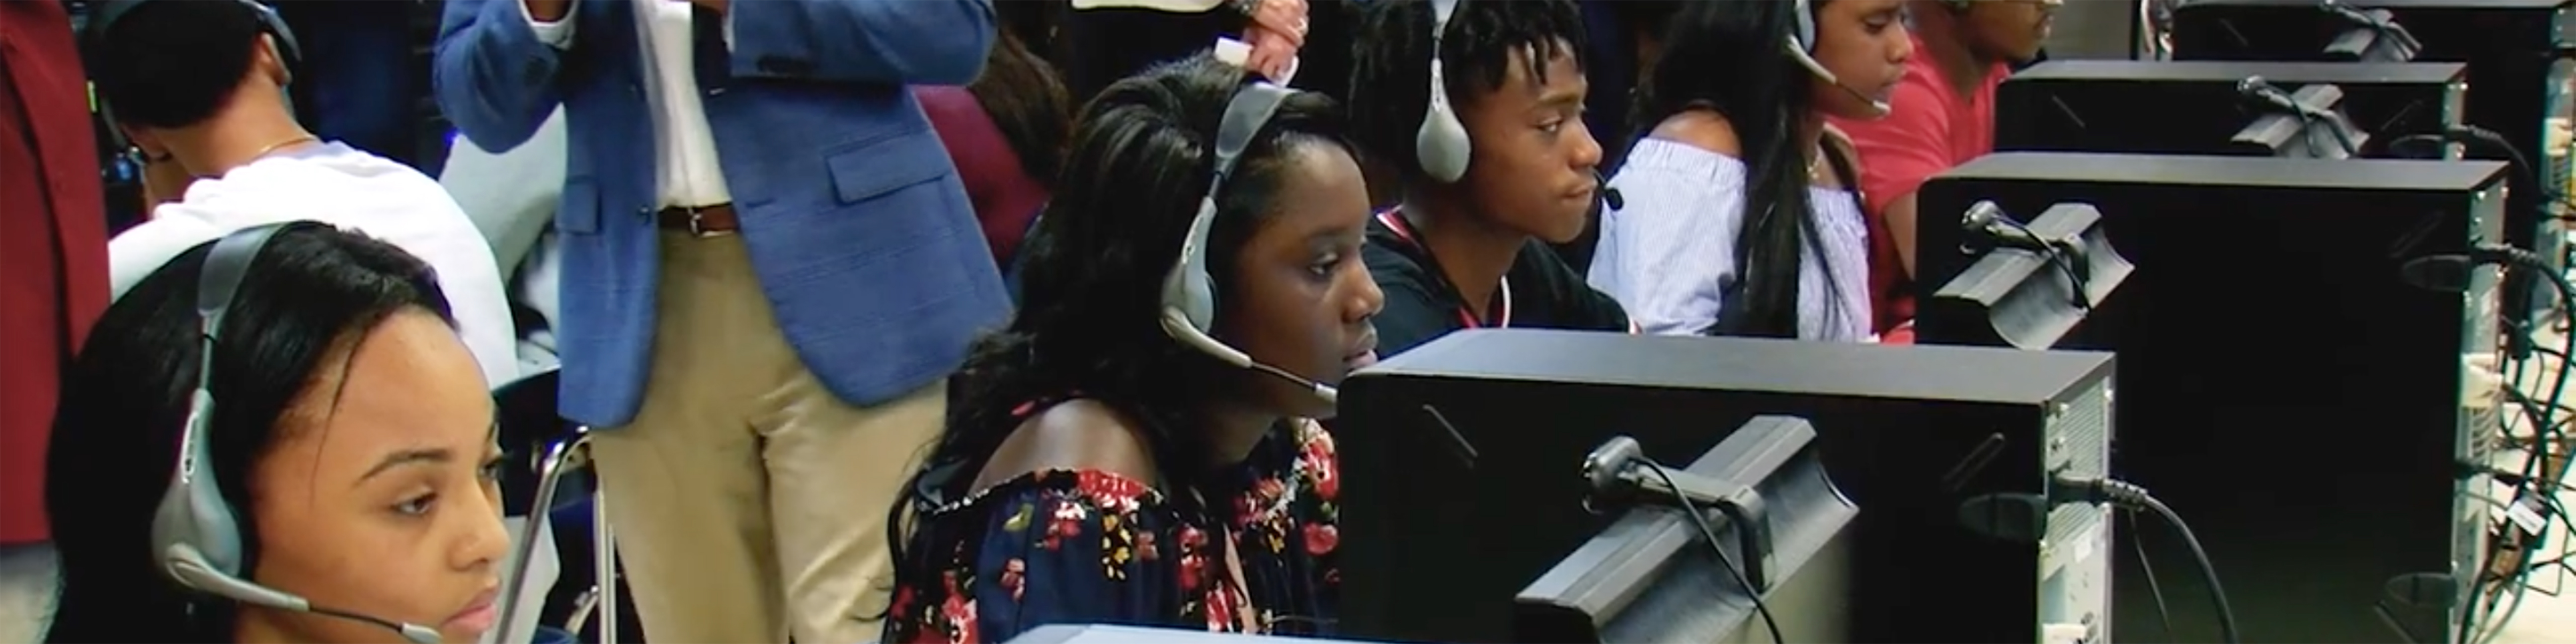 Class of black students sitting at computers, wearing headsets